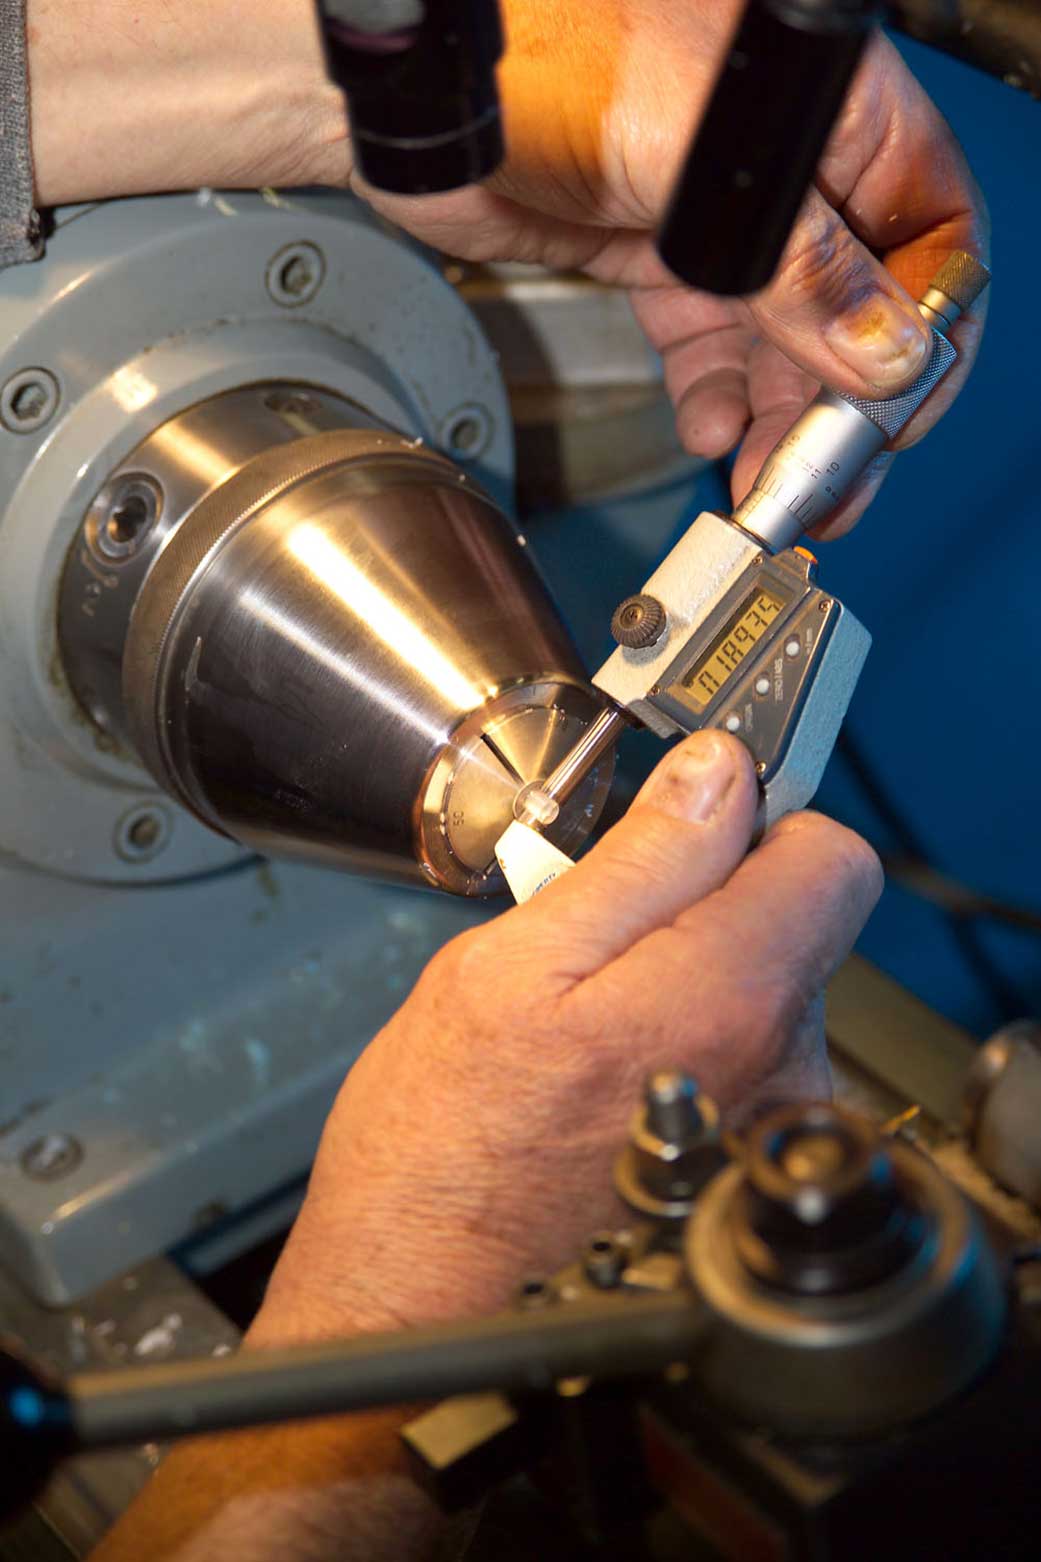 Sabot being manufactured for Hypervelocity Impact Testing.